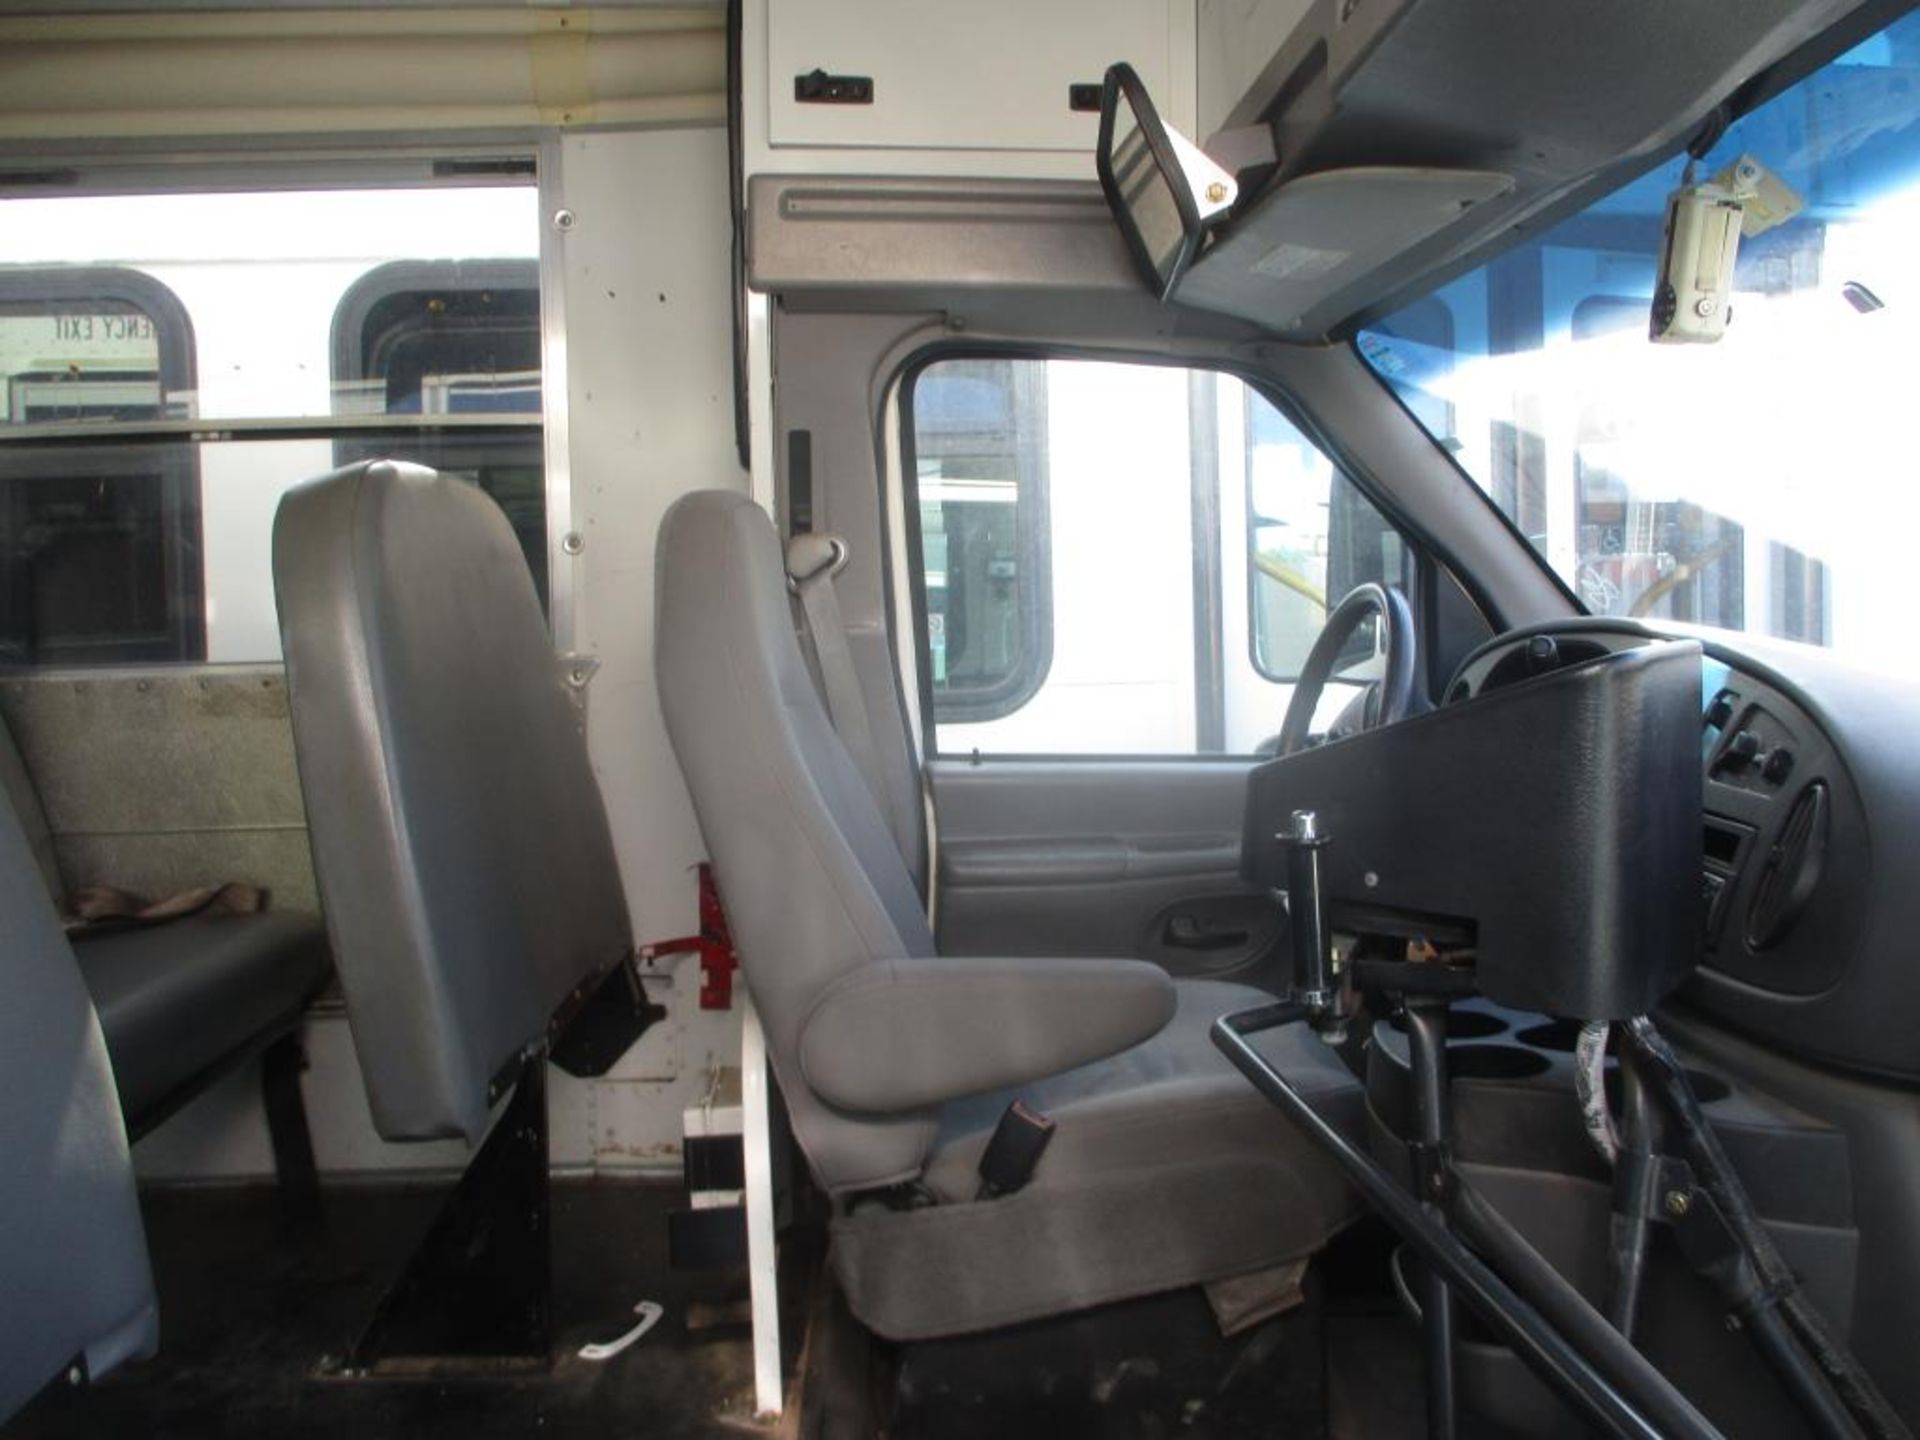 (Lot # 3921) - 2008 Ford E-Series School Bus - Image 5 of 12